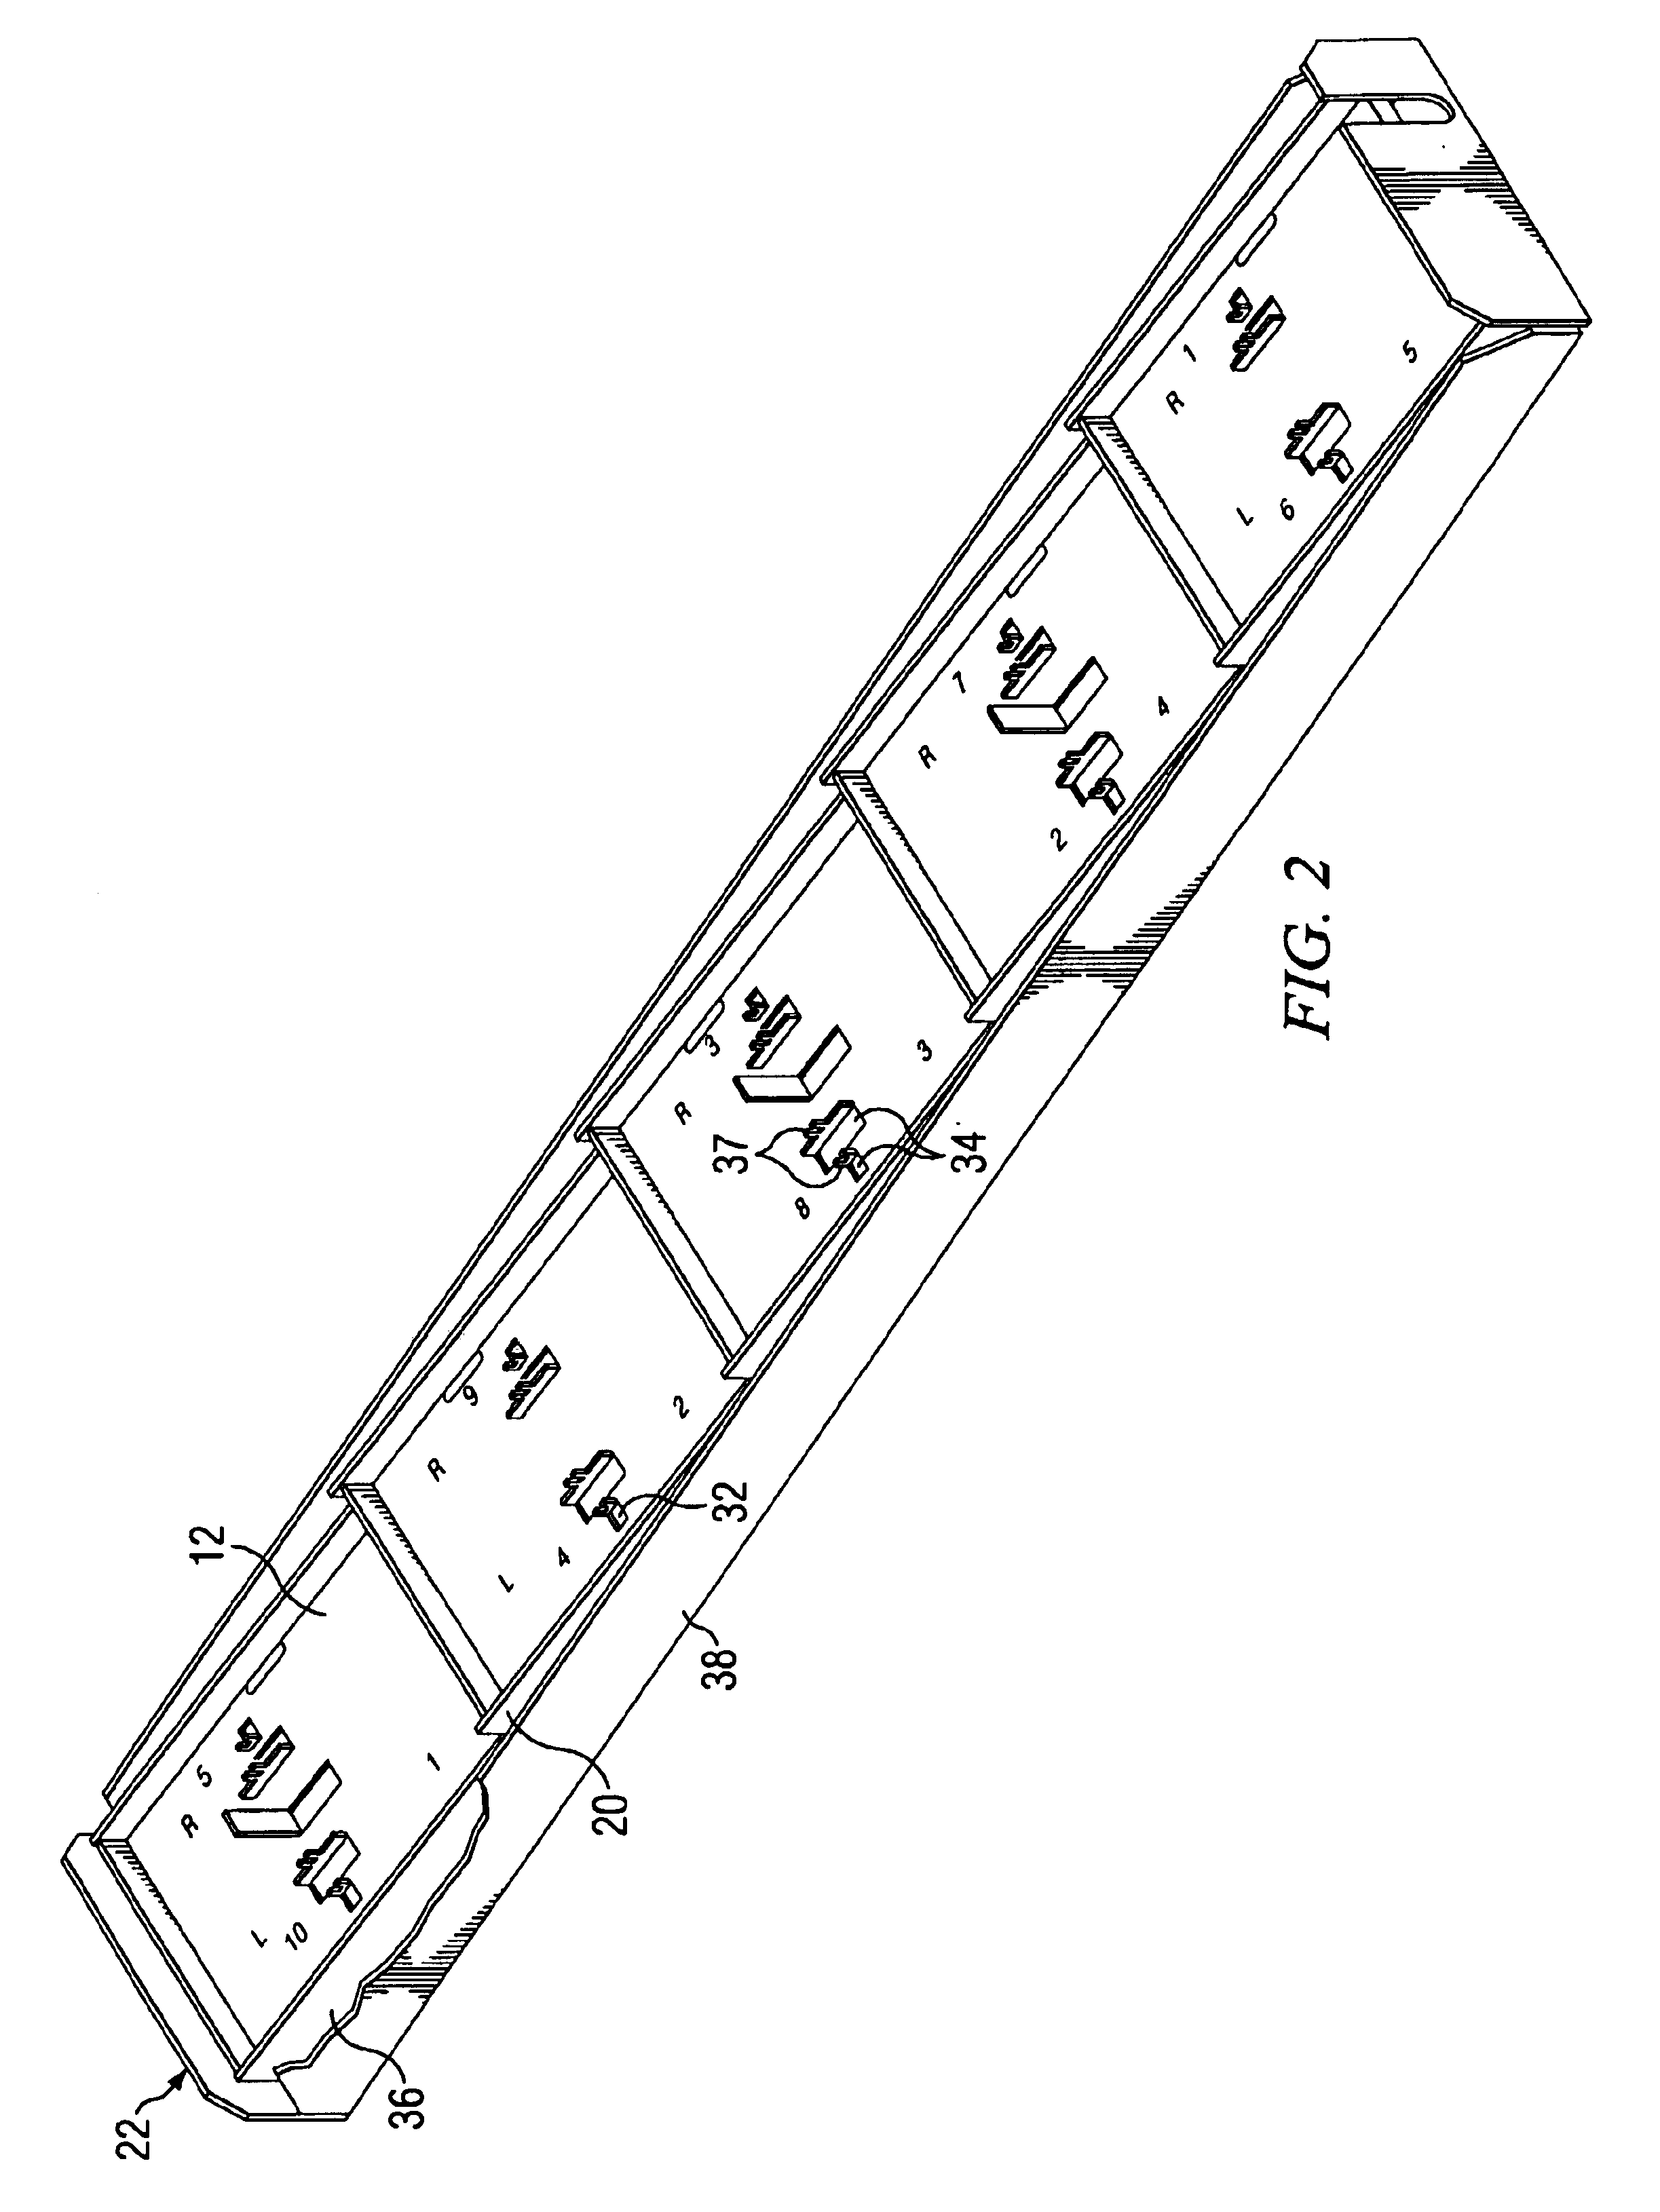 Wideband dual polarized base station antenna offering optimized horizontal beam radiation patterns and variable vertical beam tilt